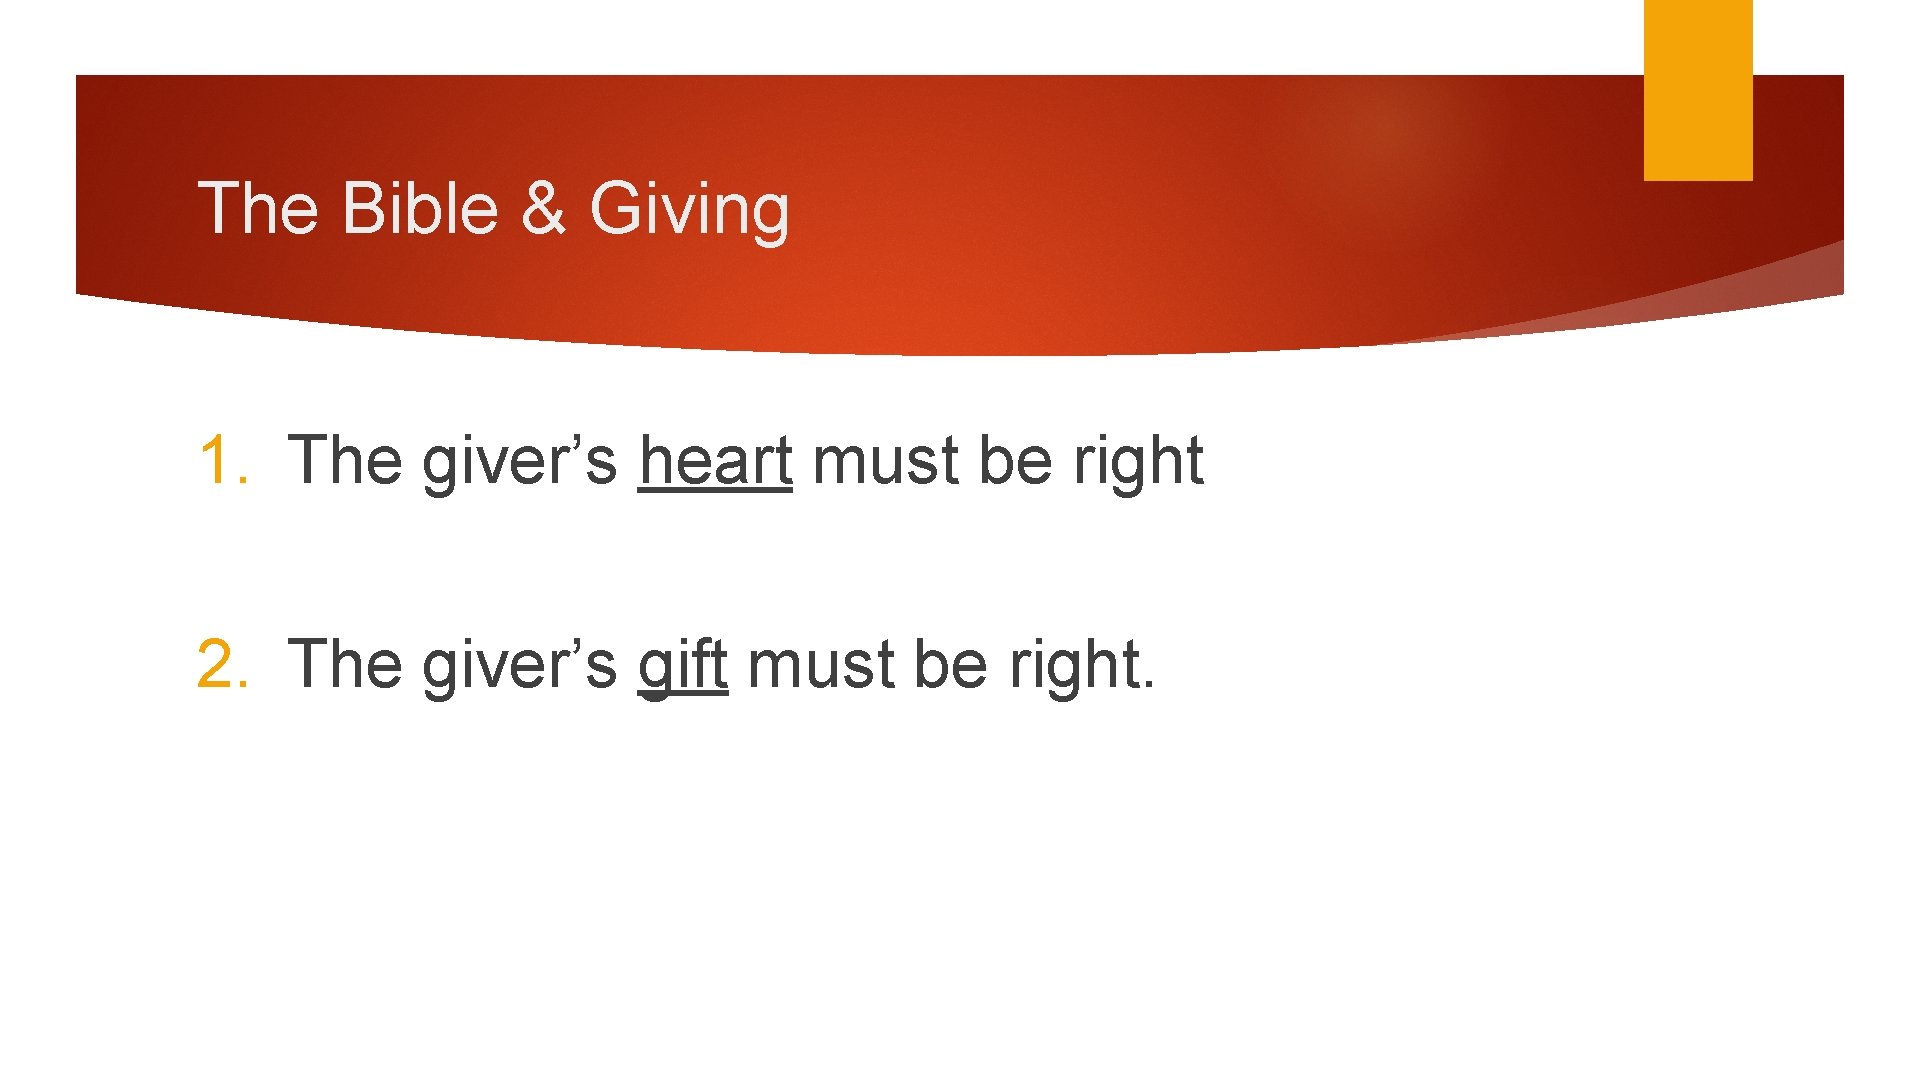 The Bible & Giving 1. The giver’s heart must be right 2. The giver’s